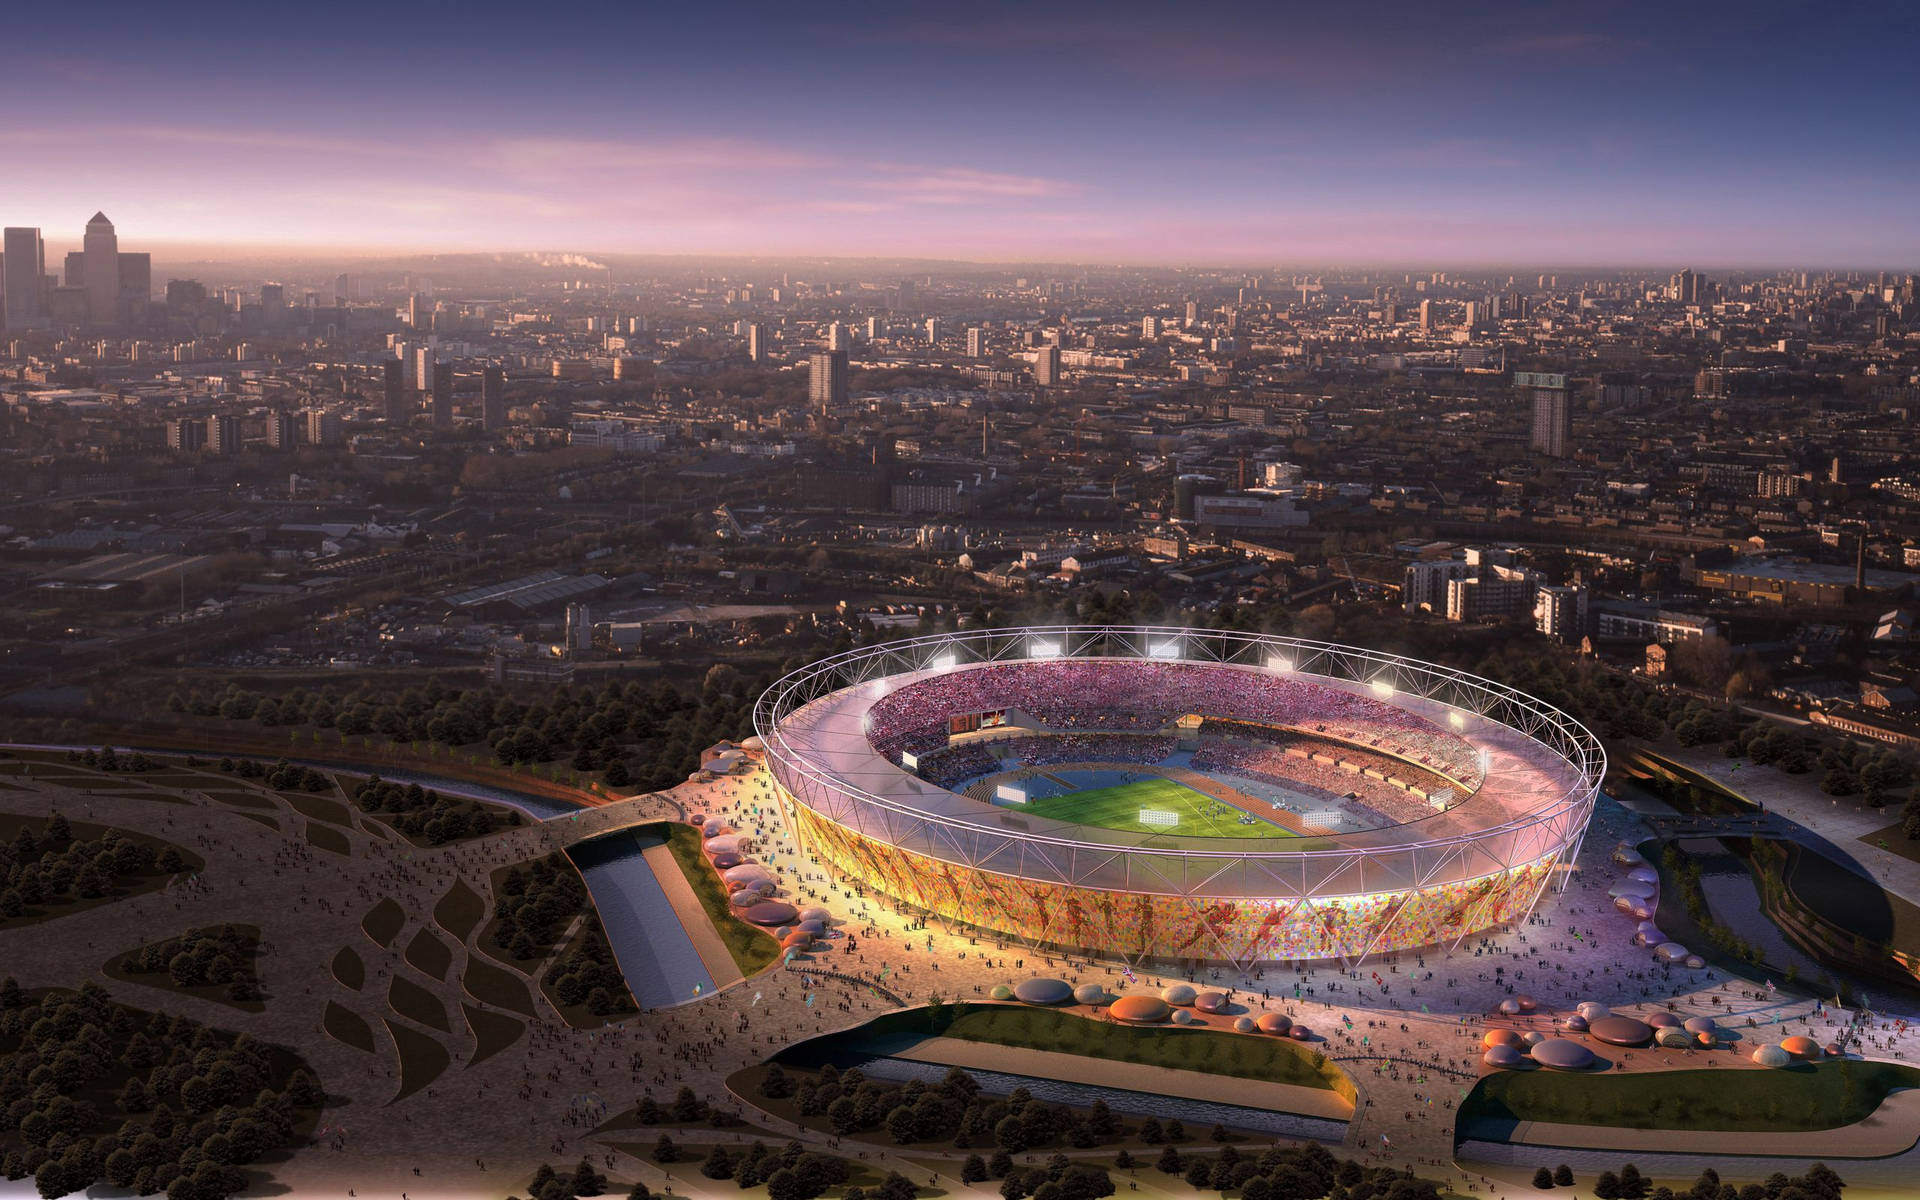 London Olympic Stadium at dawn in the midst of a modern city wallpaper.